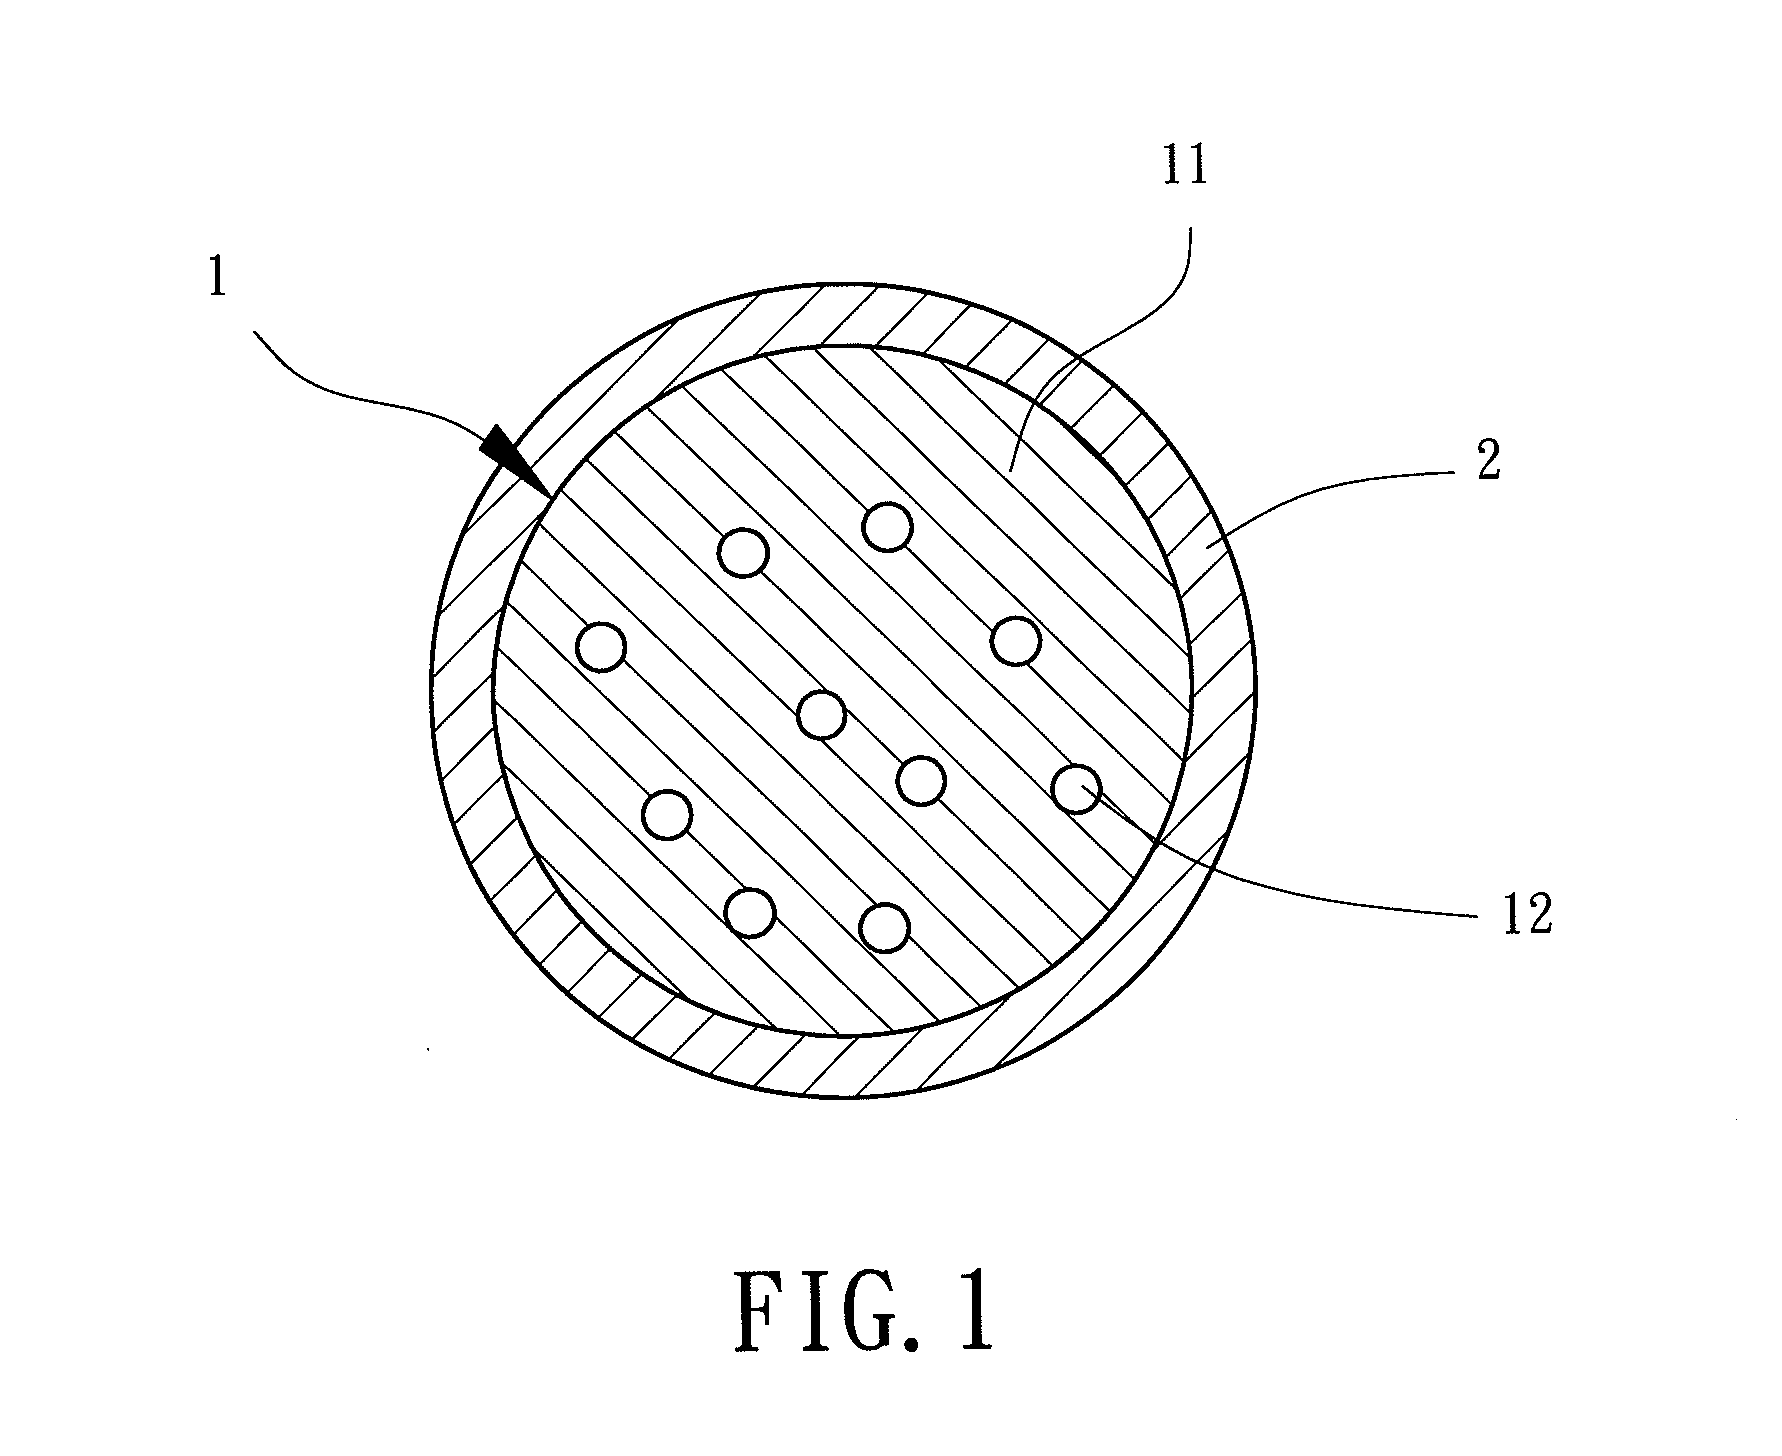 Drug carrier for treating of gastrointestinal ulcer